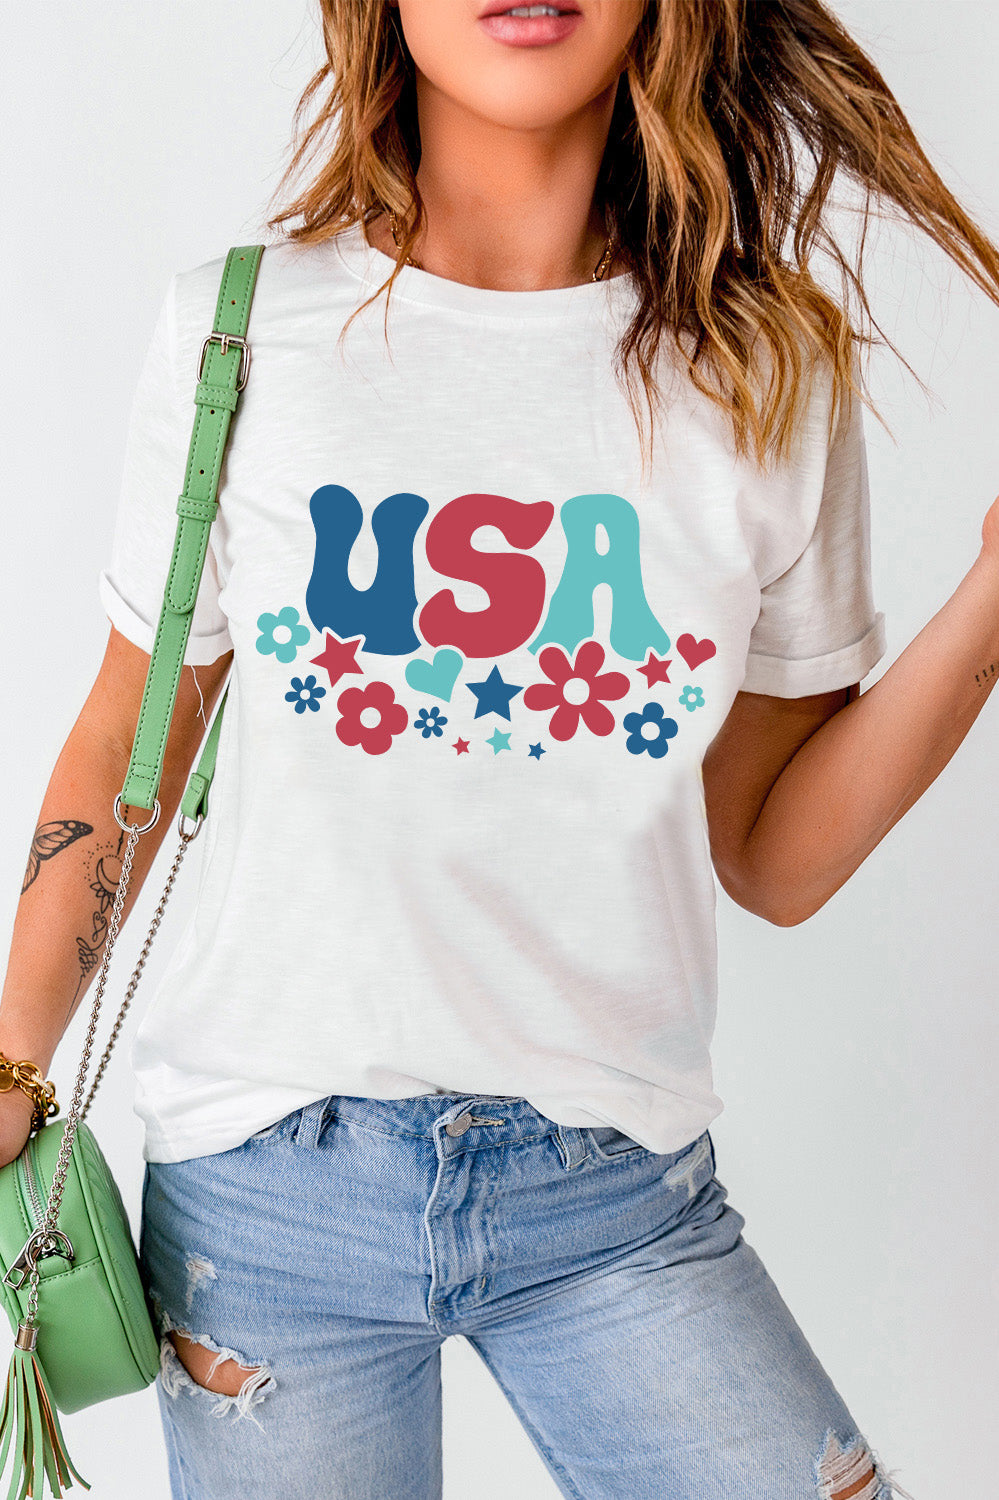 USA Round Neck Short Sleeve T-Shirt Casual Chic Boutique